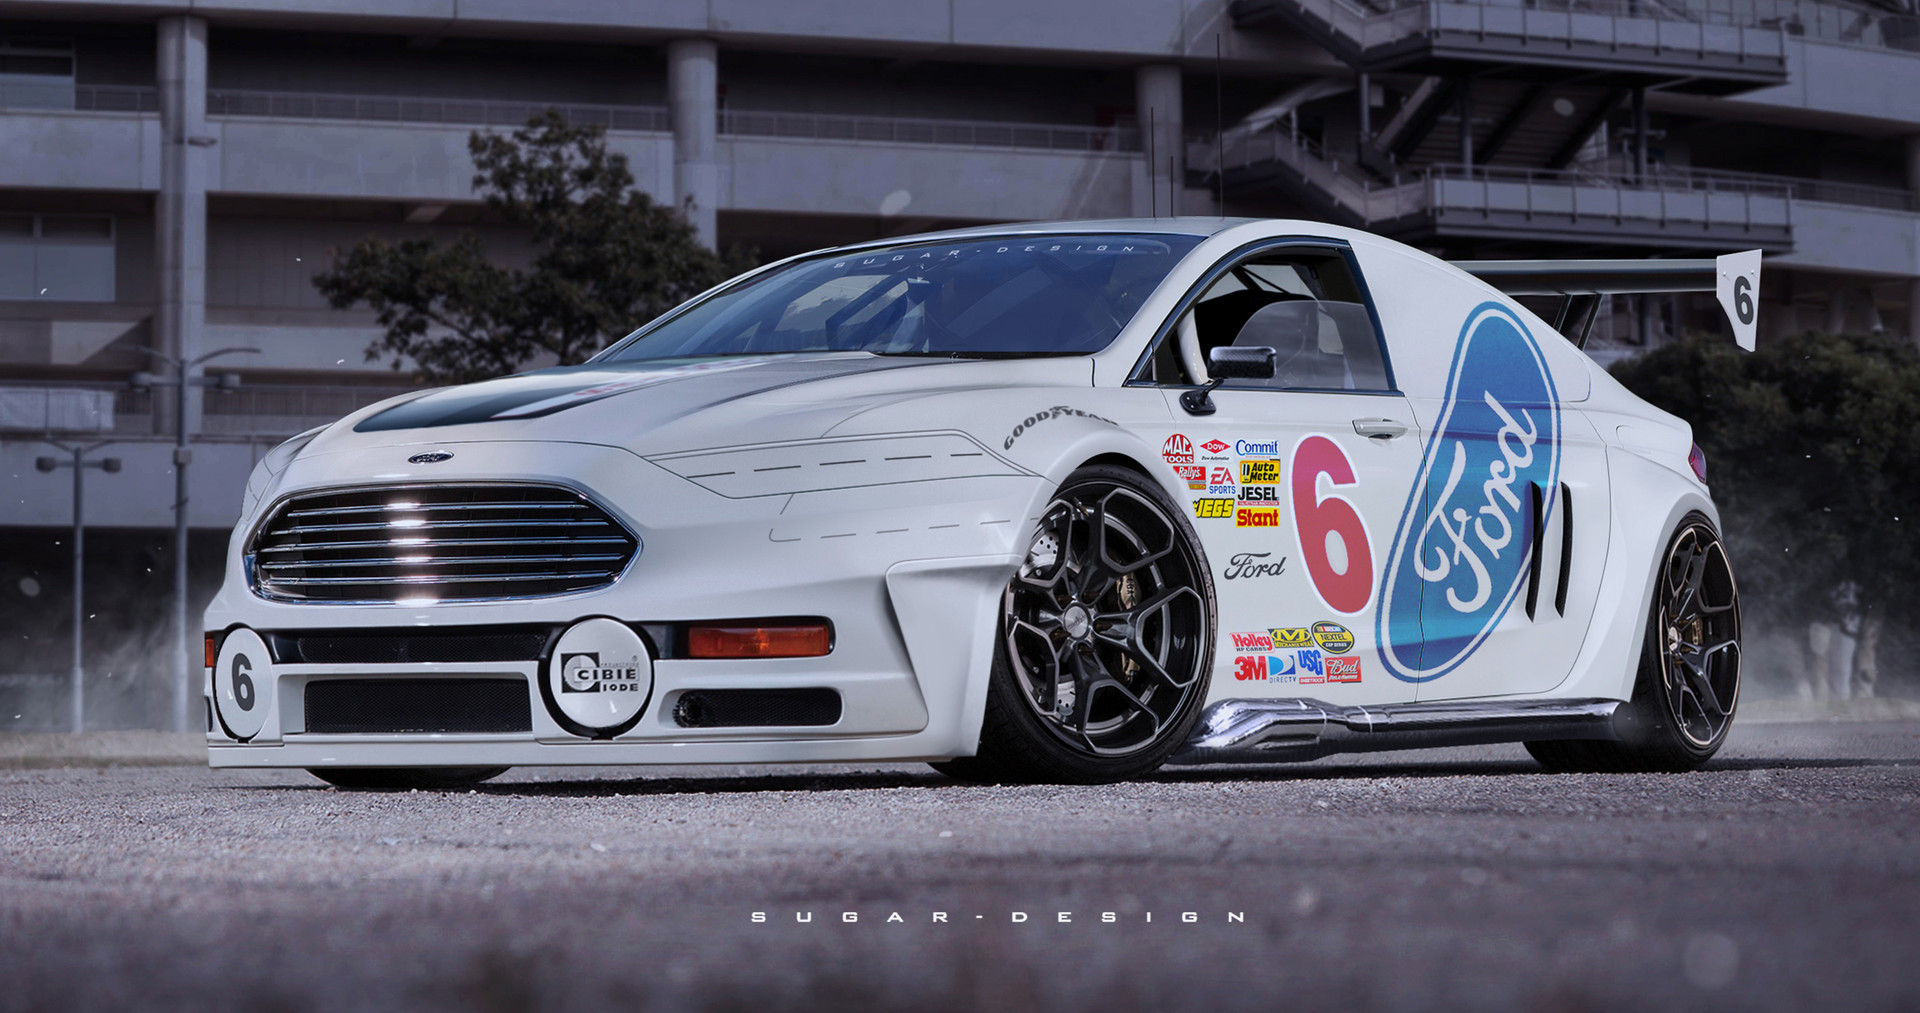 ArtStation - Ford Mondeo MK3 made cool